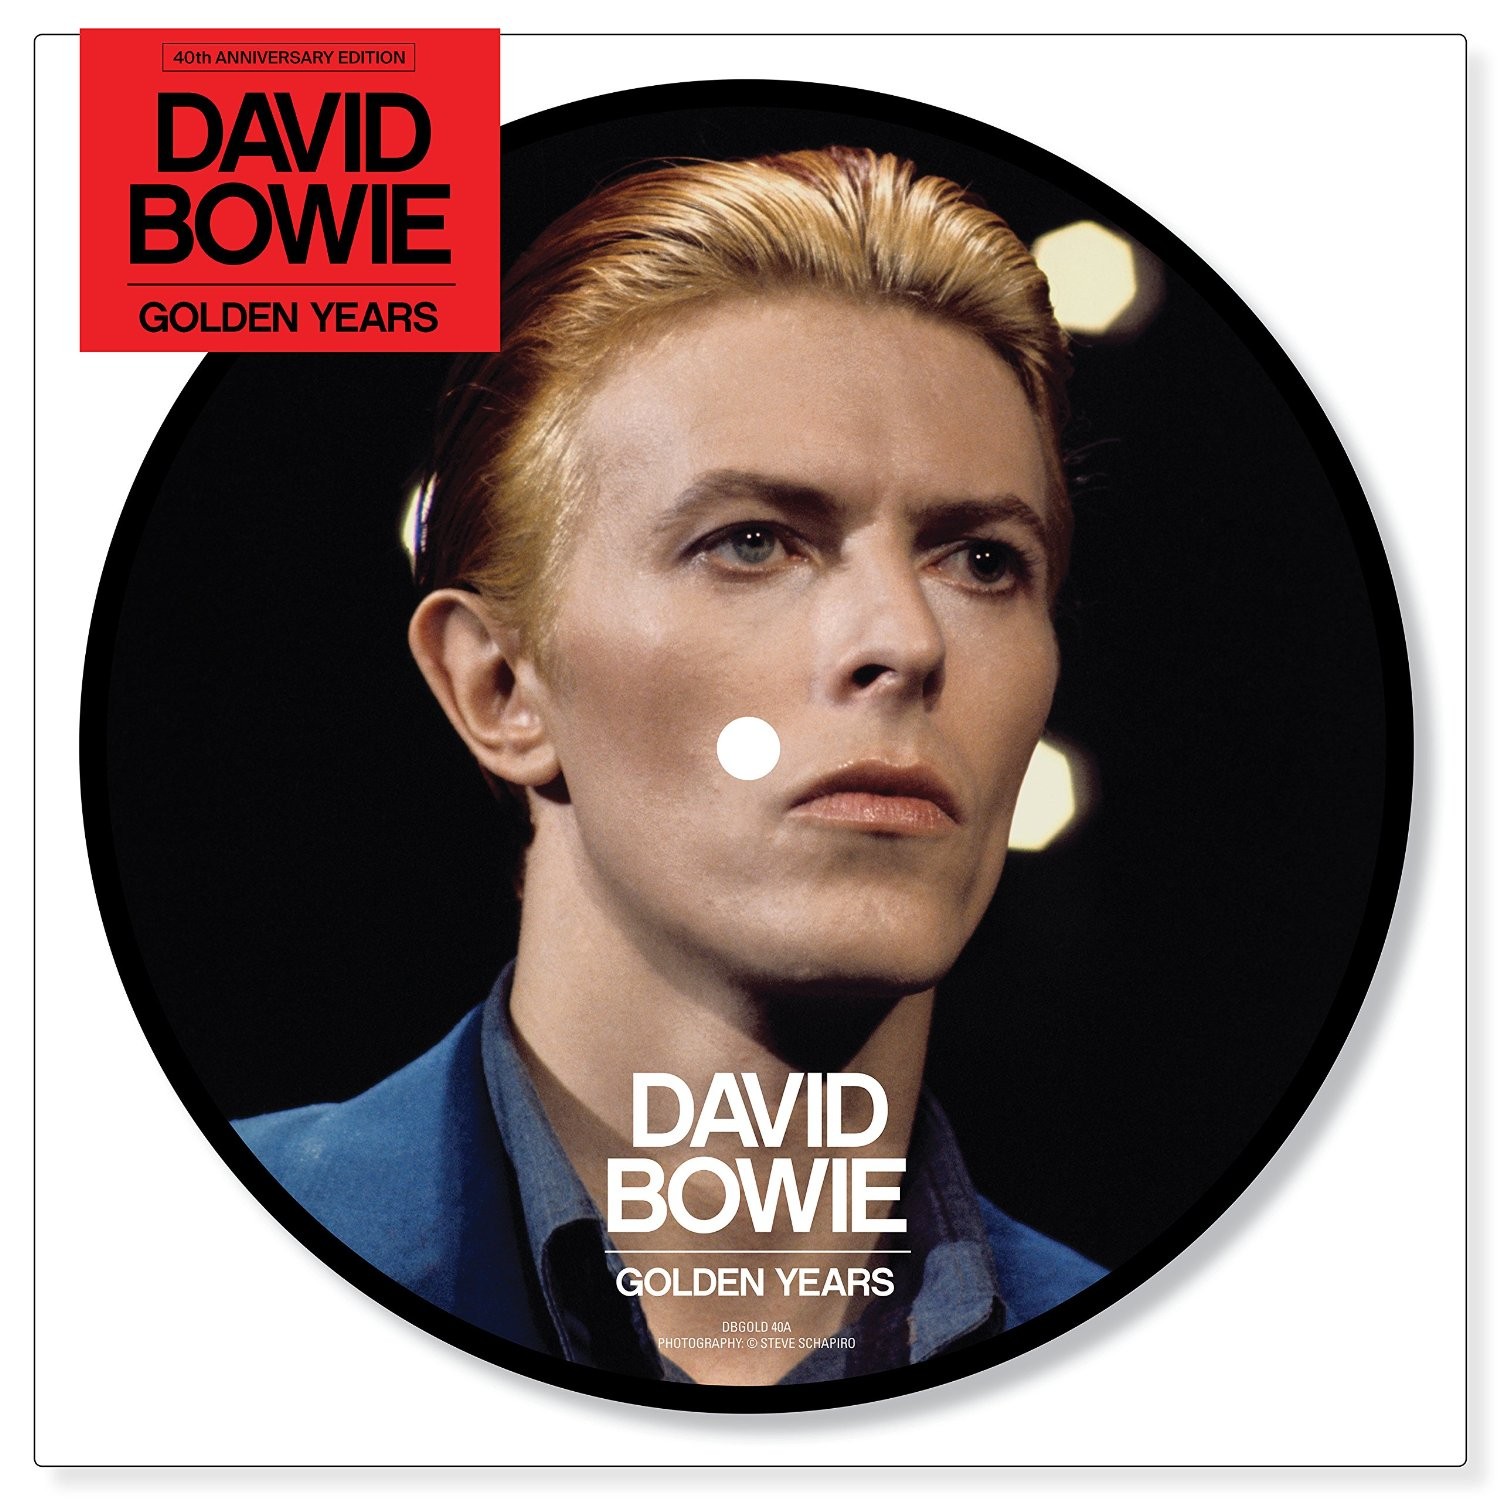 David Bowie Golden Years EP